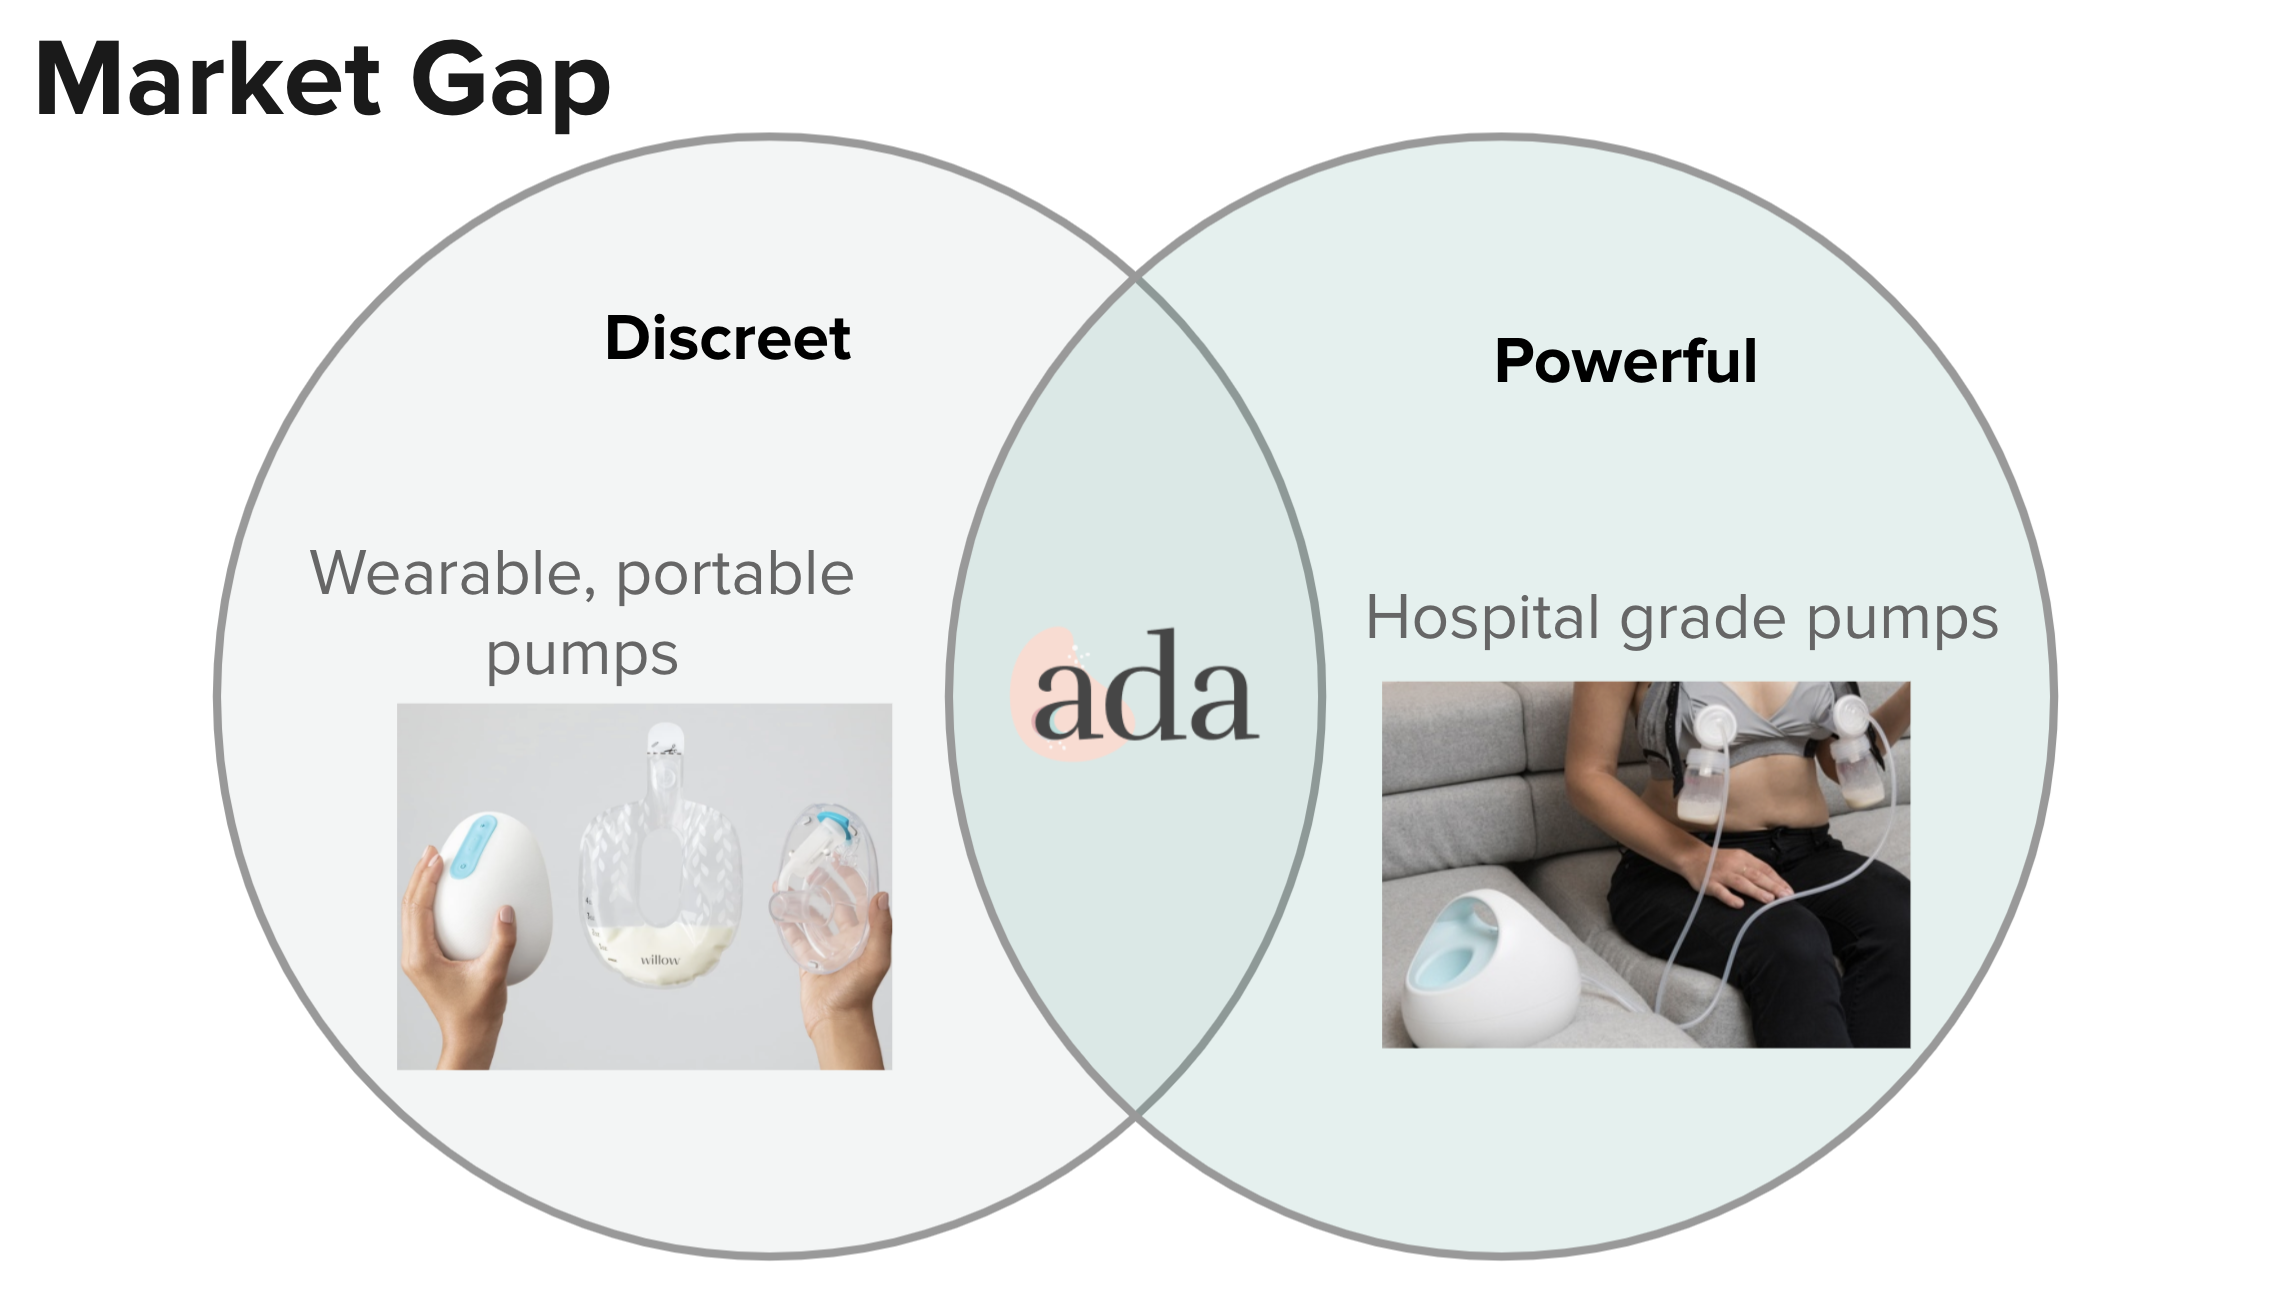 Current market gap in the electric breast pump industry